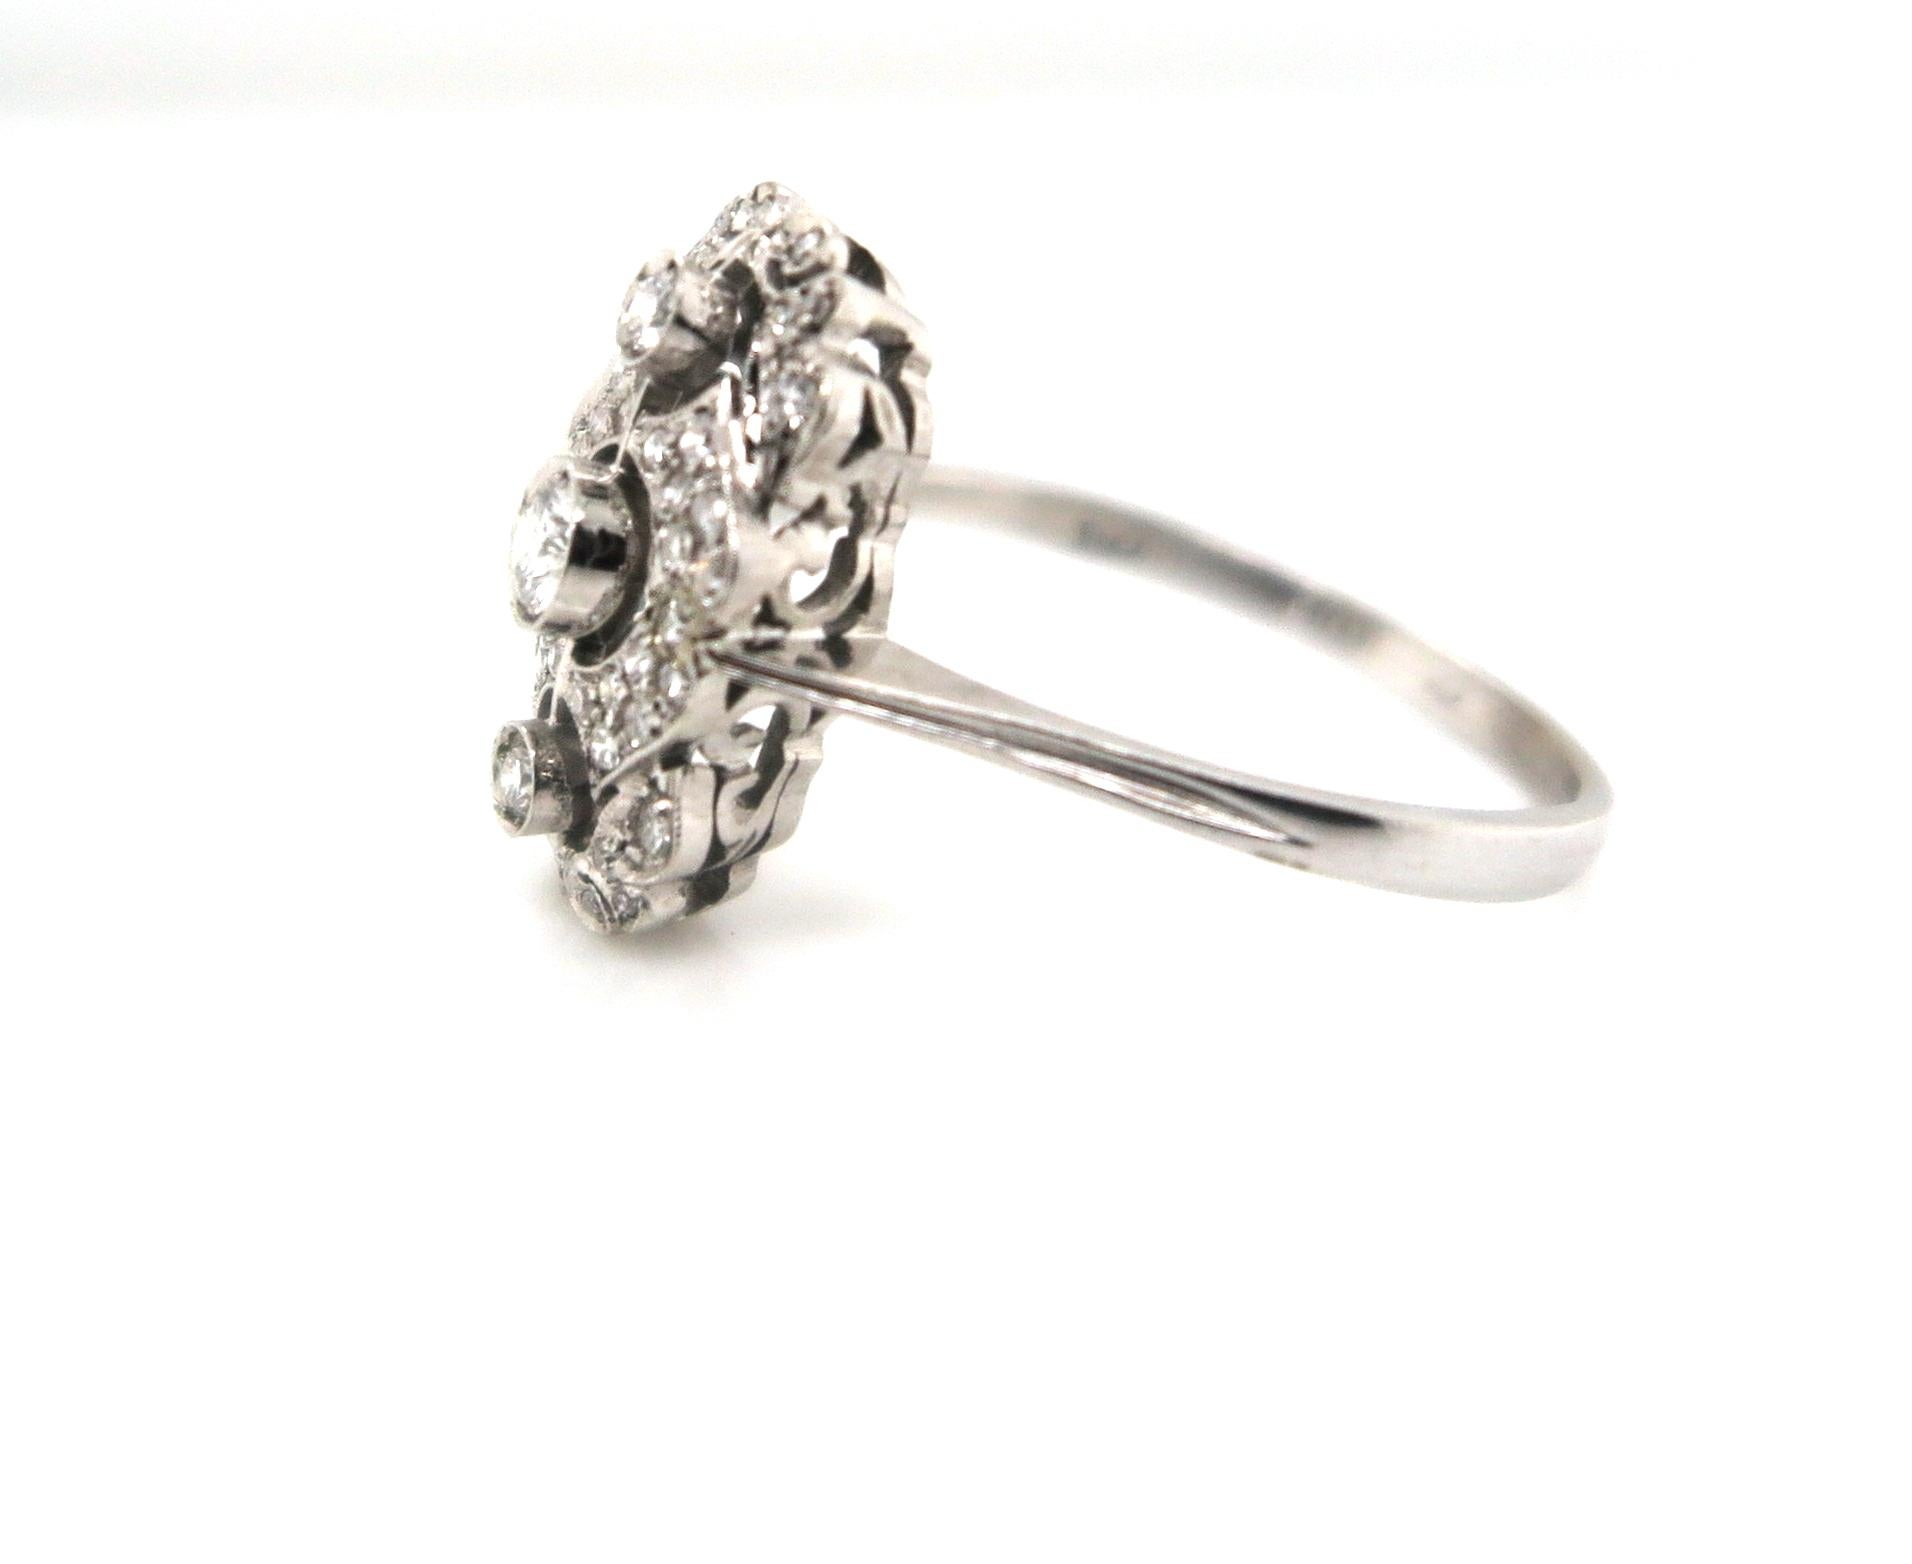 Dainty and one-of-a-kind, this is an Art Deco inspired ring is crafted in 18K white gold. This ring also features three Round Brilliant cut diamonds in the centre and intricately placed fine round brilliant diamonds around the central diamonds. With